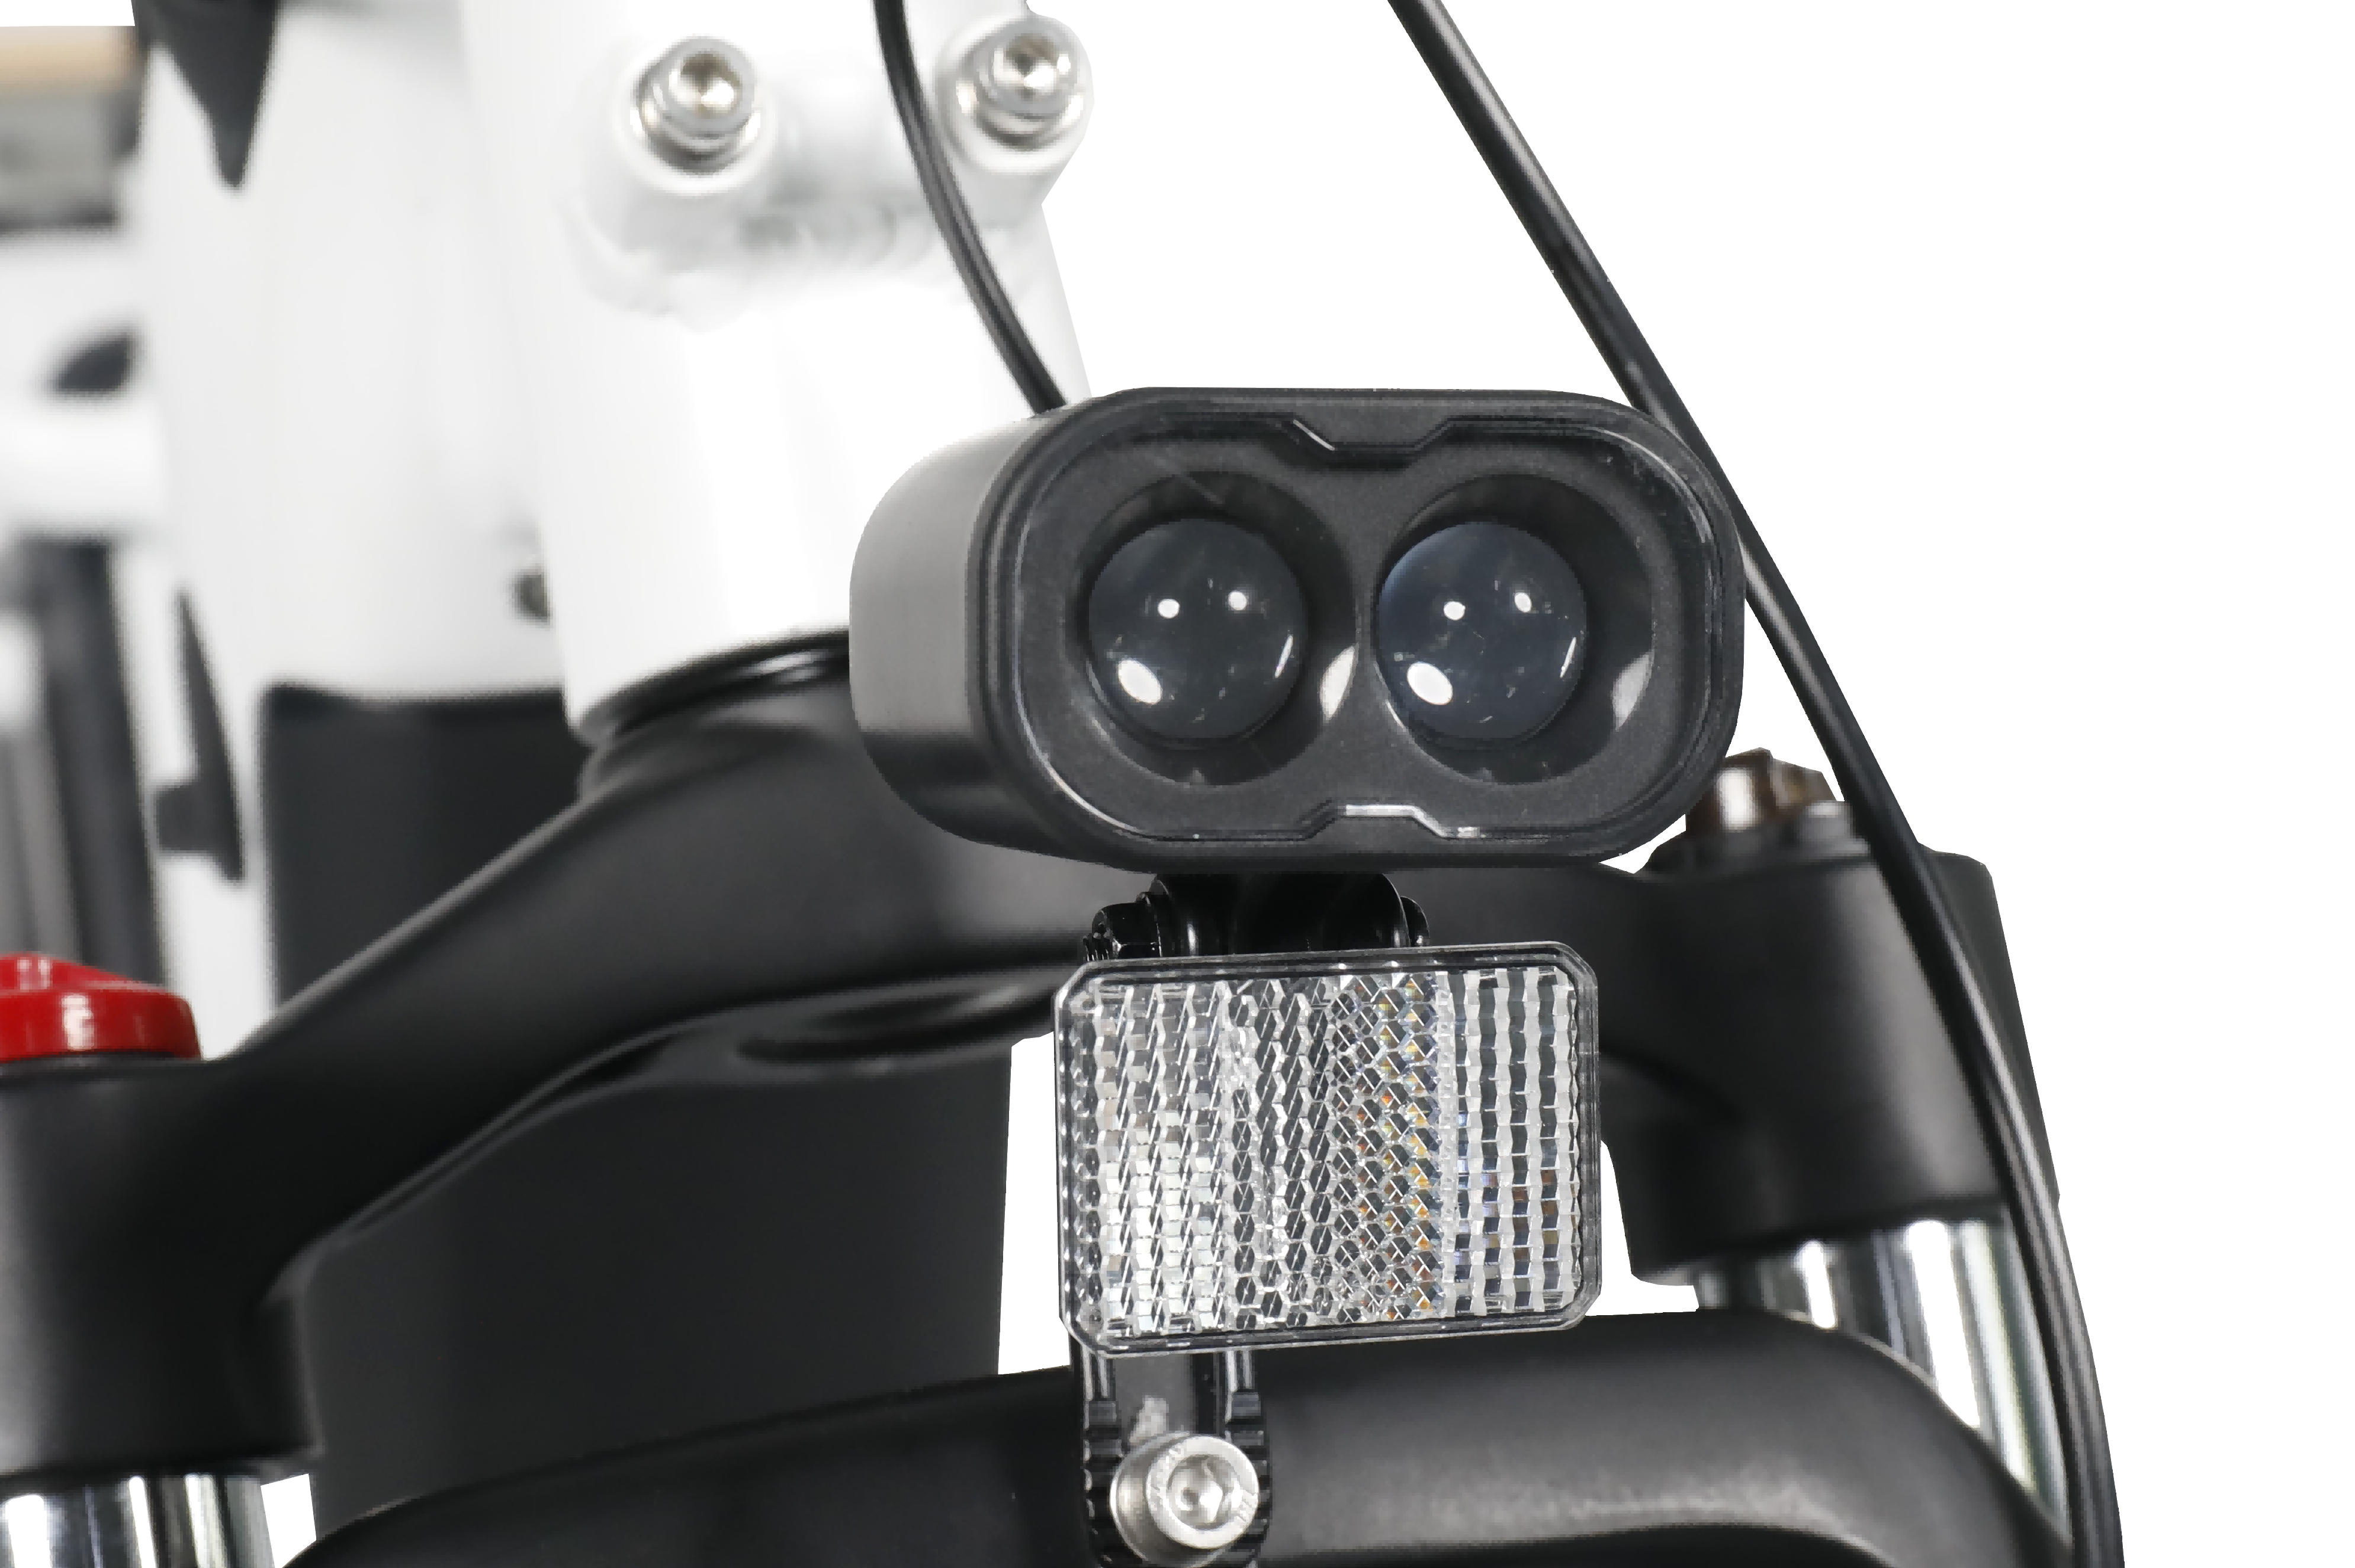 integrated front light